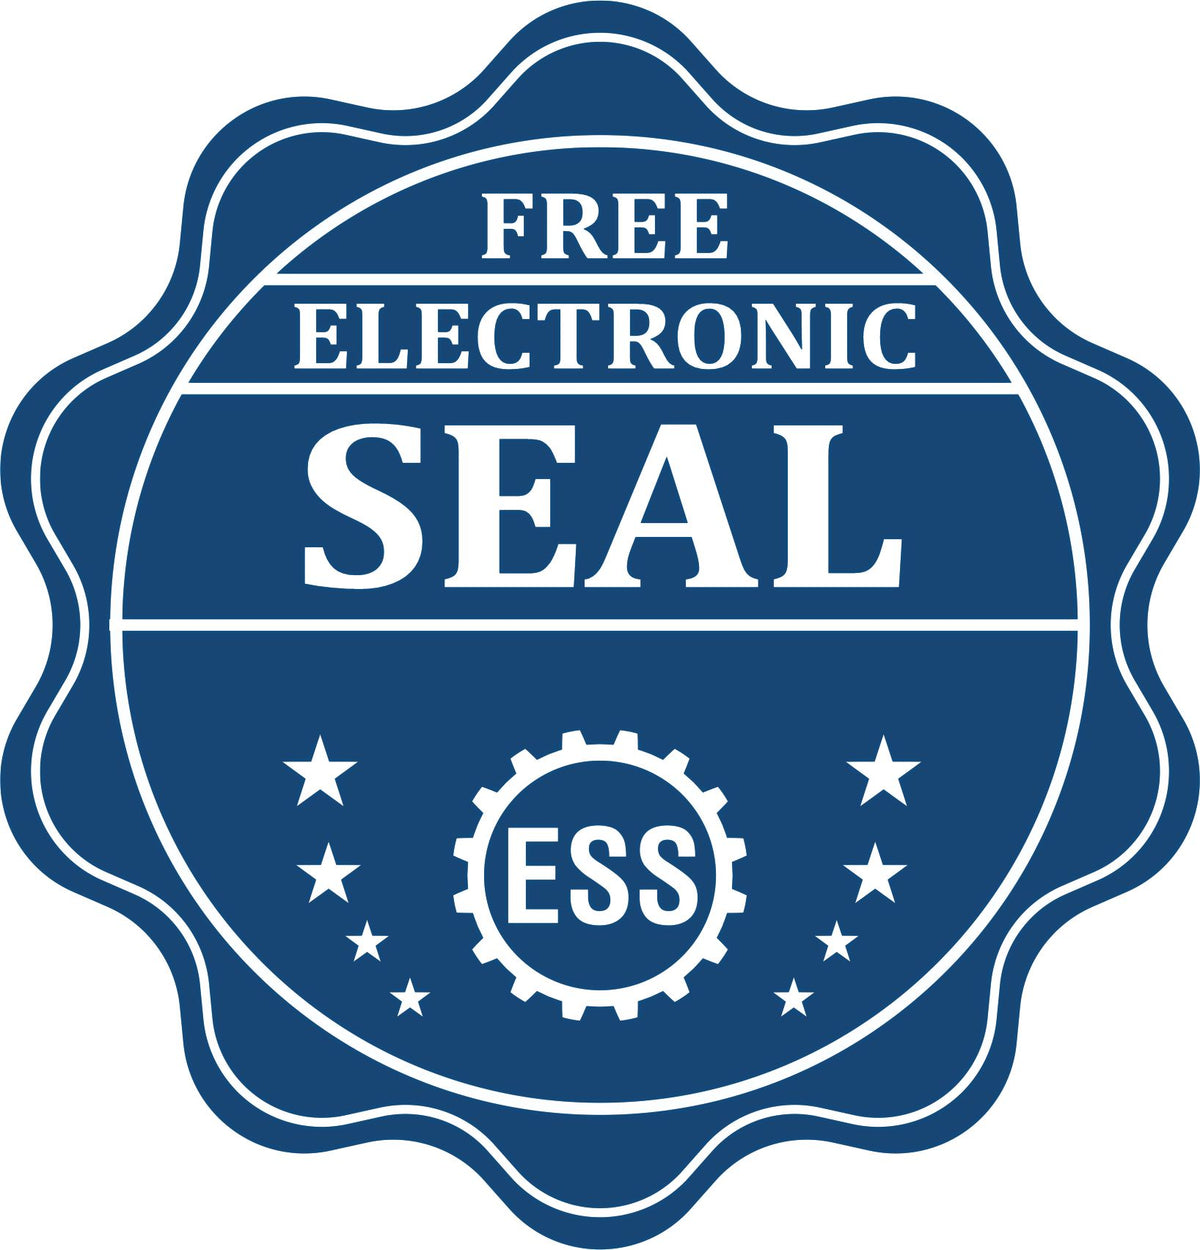 A badge showing a free electronic seal for the Tennessee Professional Engineer Seal Stamp with stars and the ESS gear on the emblem.